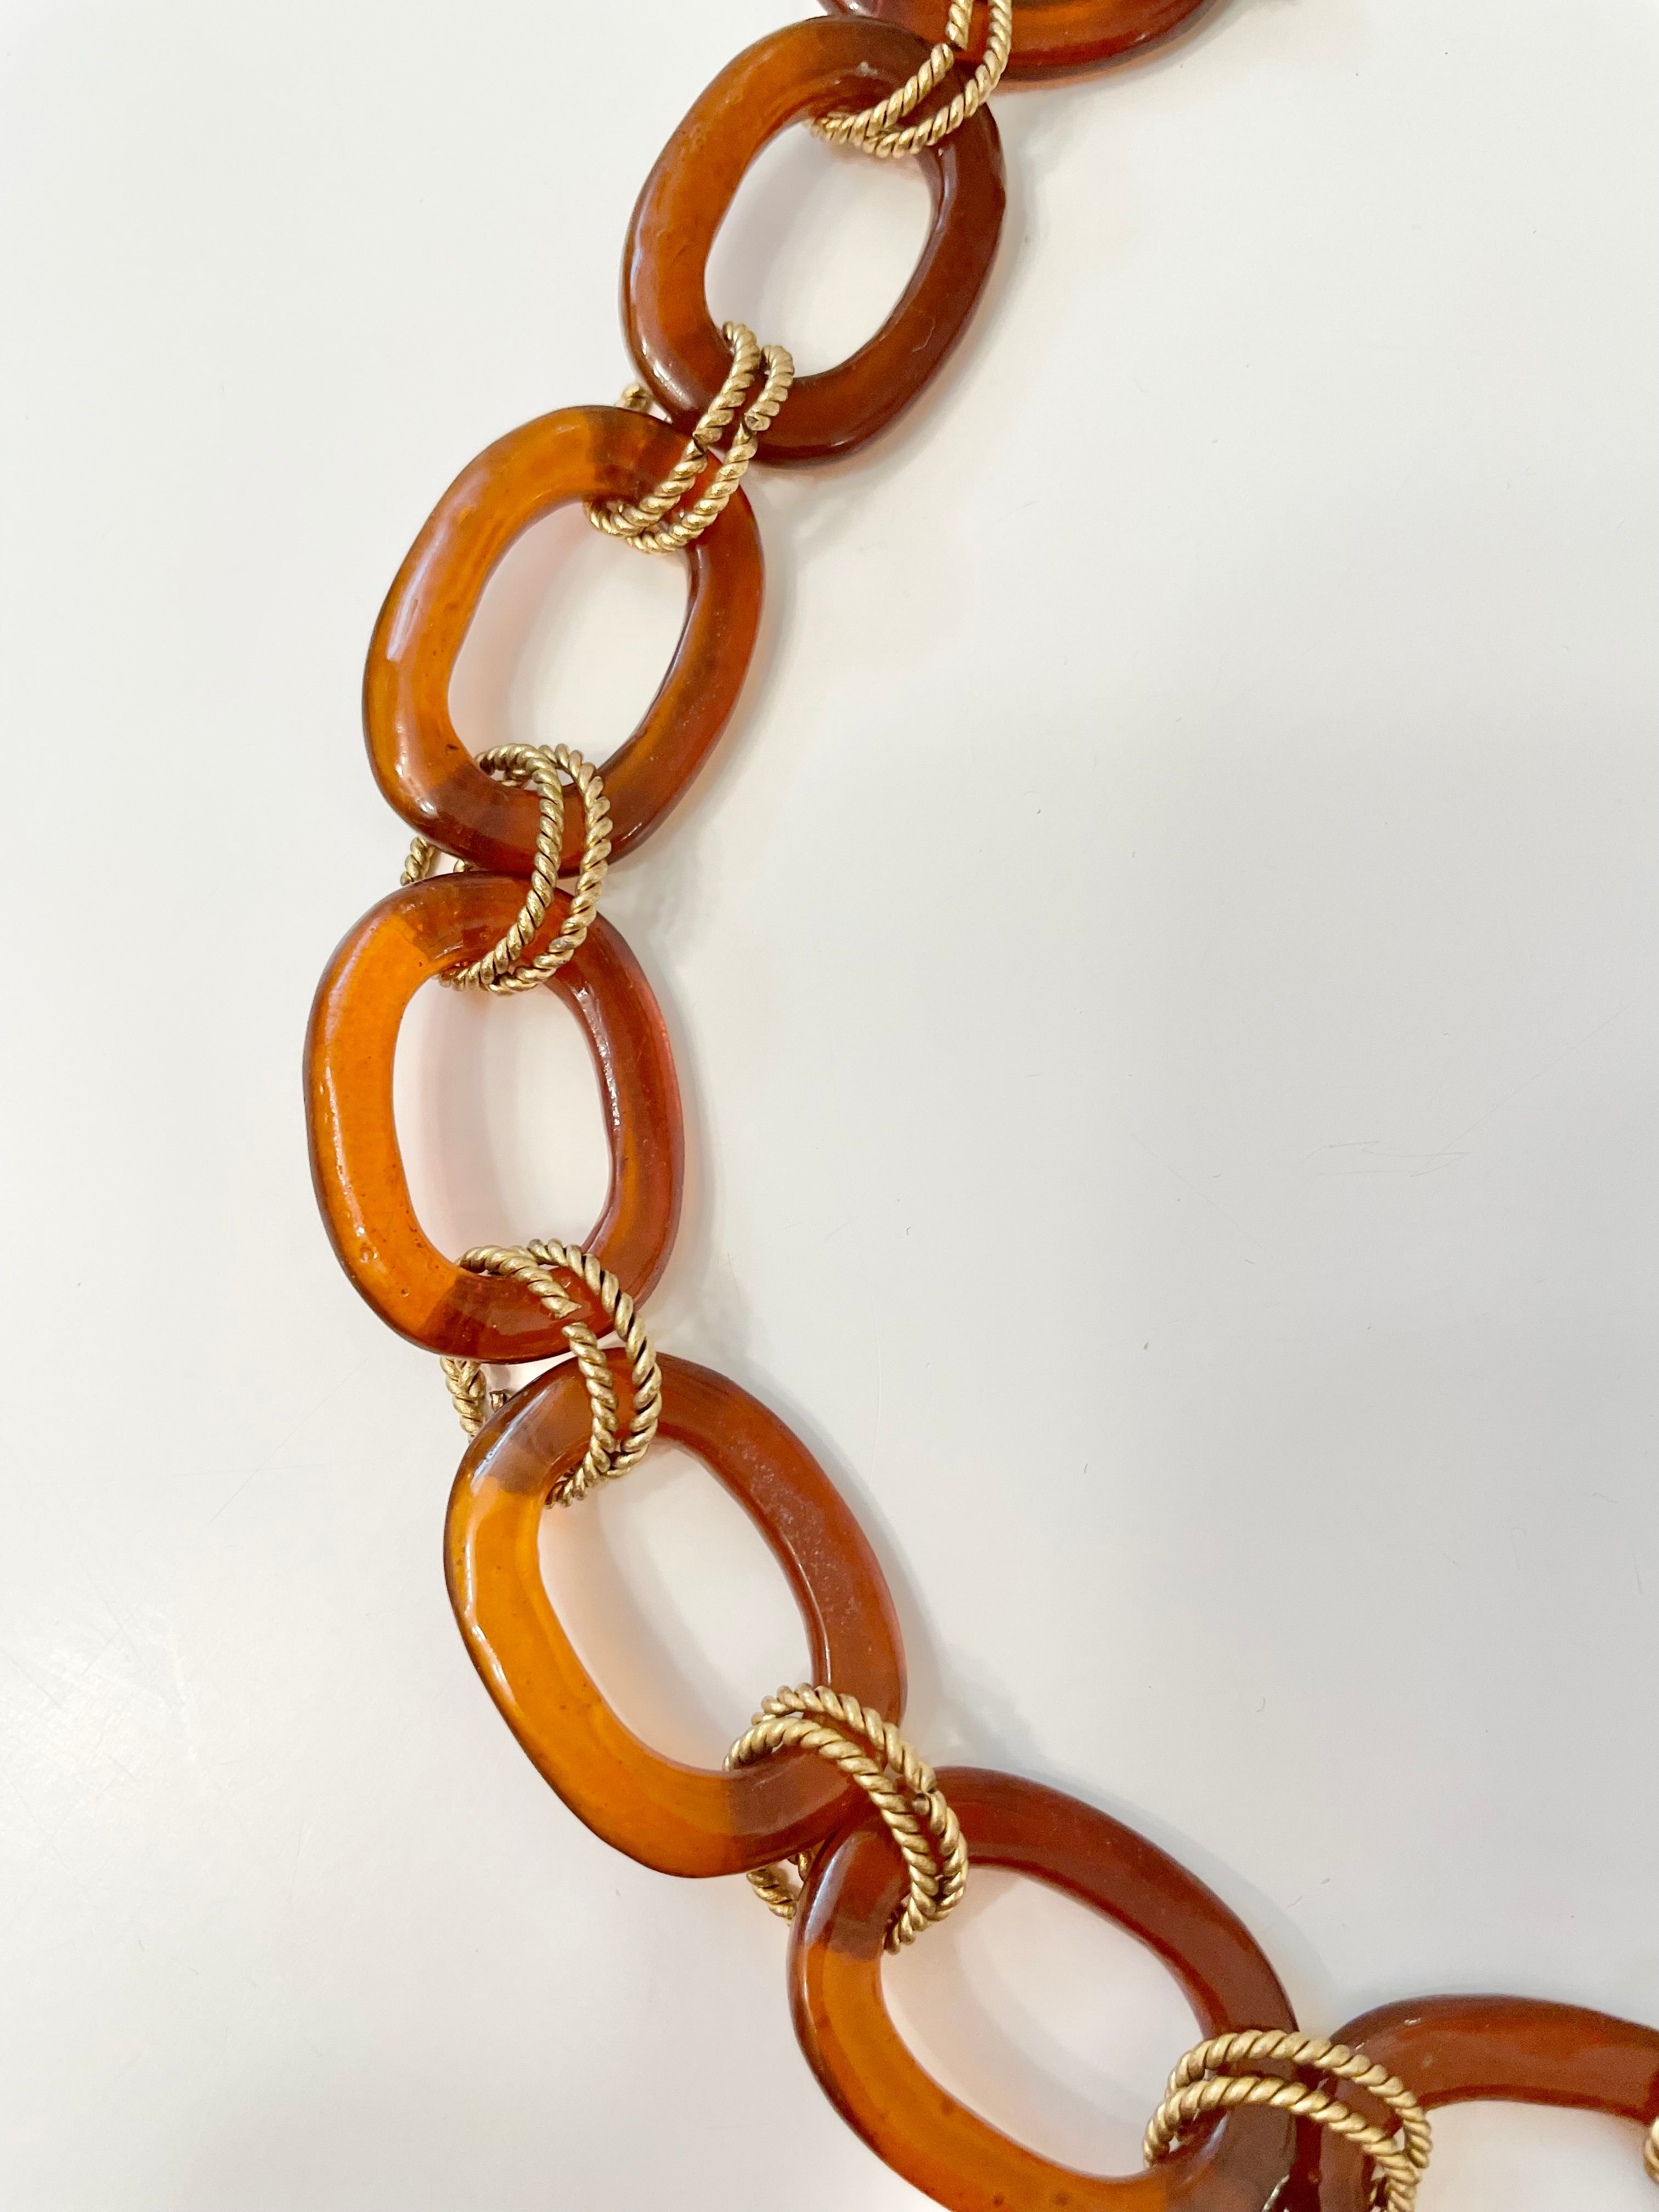 Vintage 1970's classy amber lucite chainlink necklace.... so chic